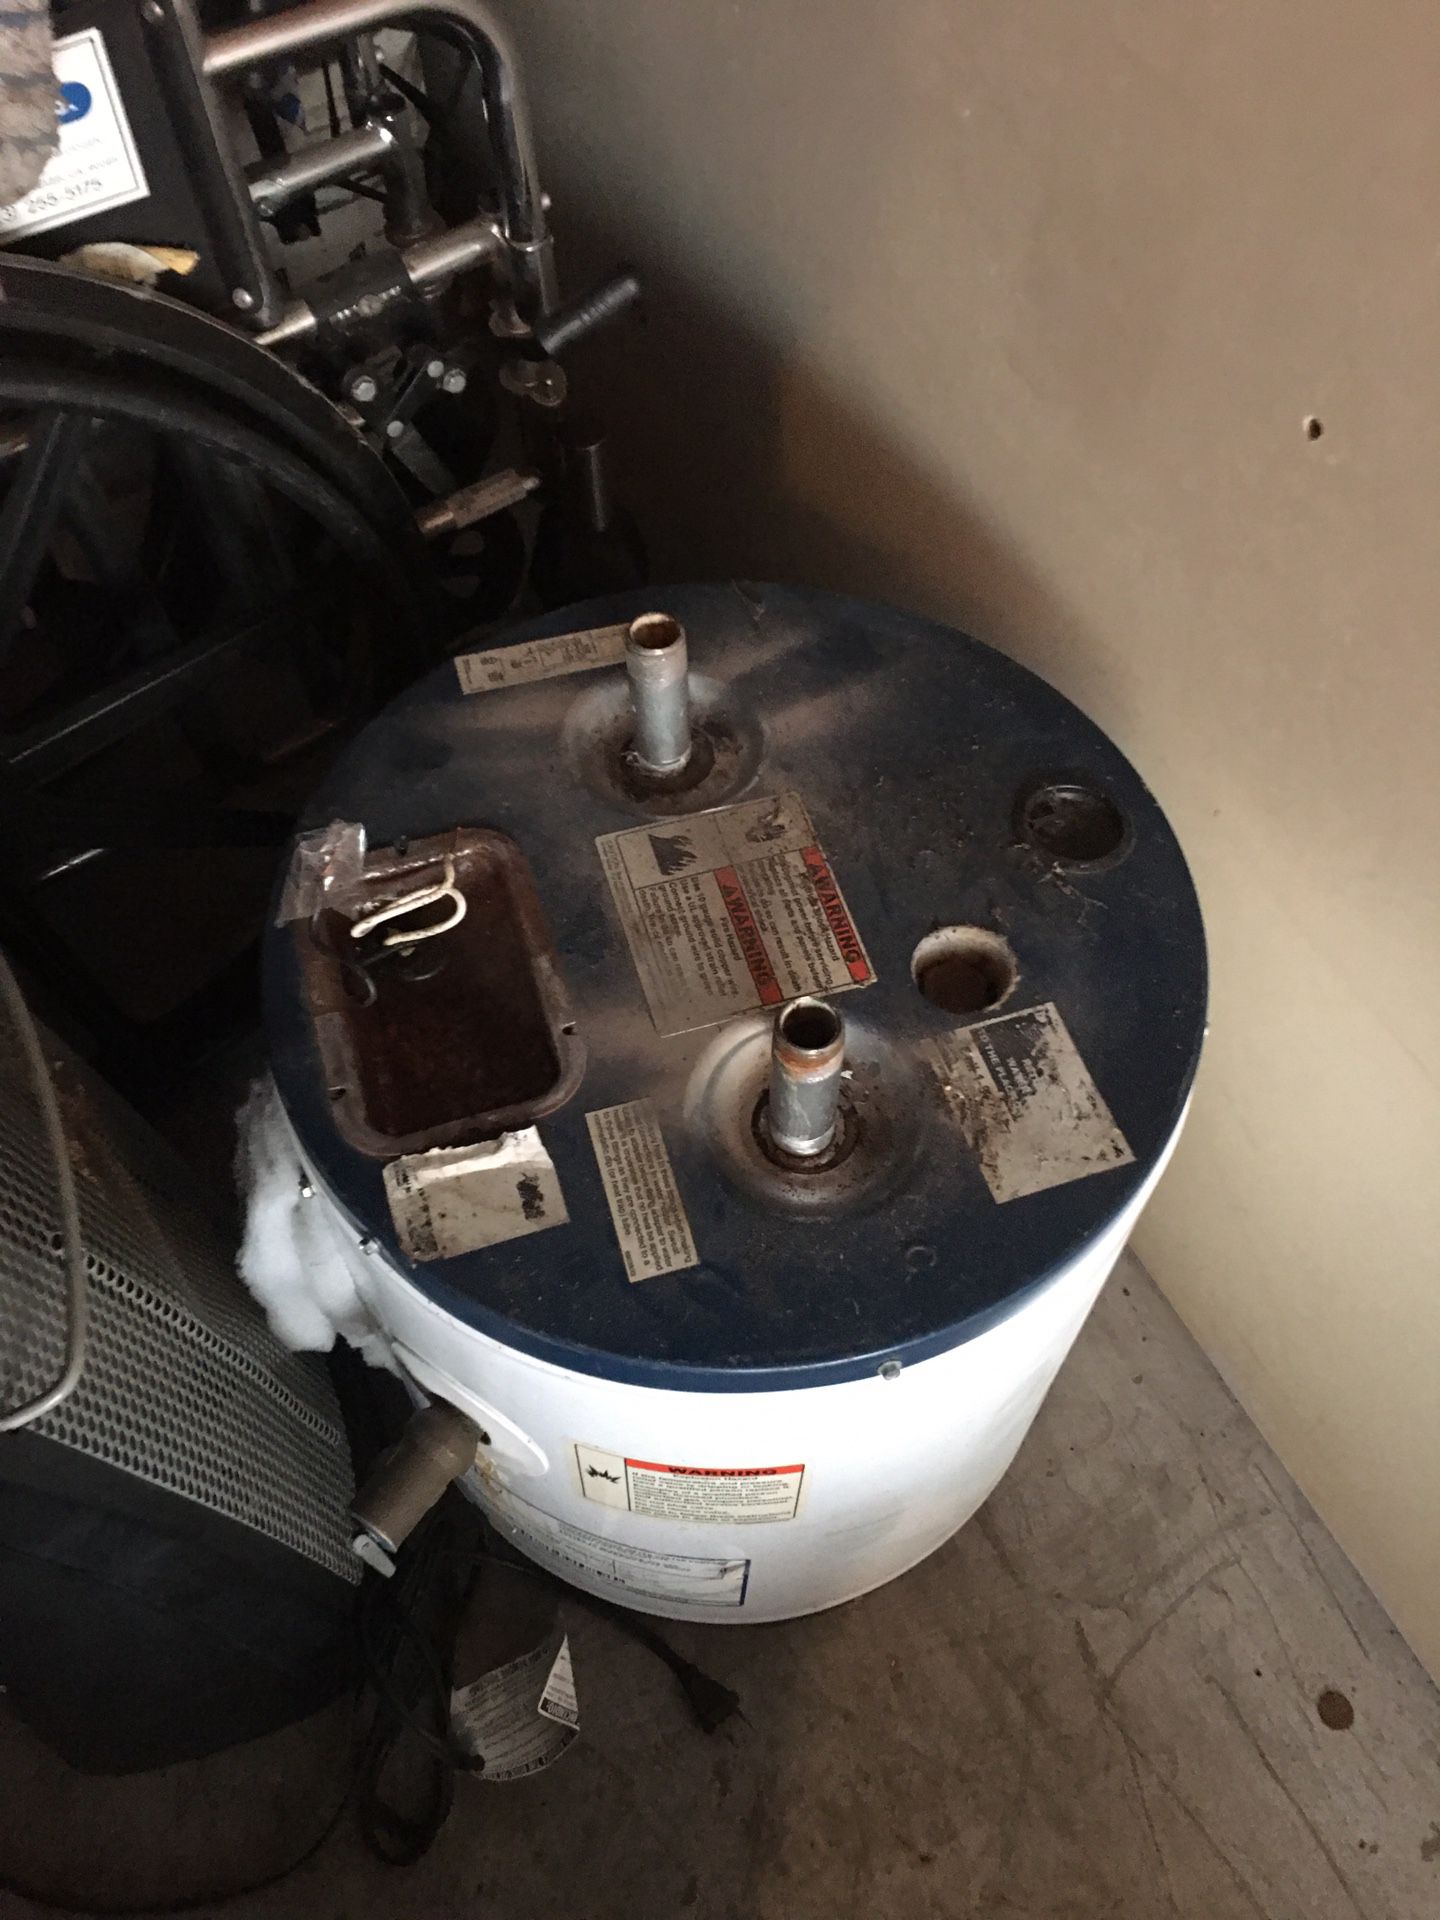 Electrical water heater $100 or obo helps save on gas bill